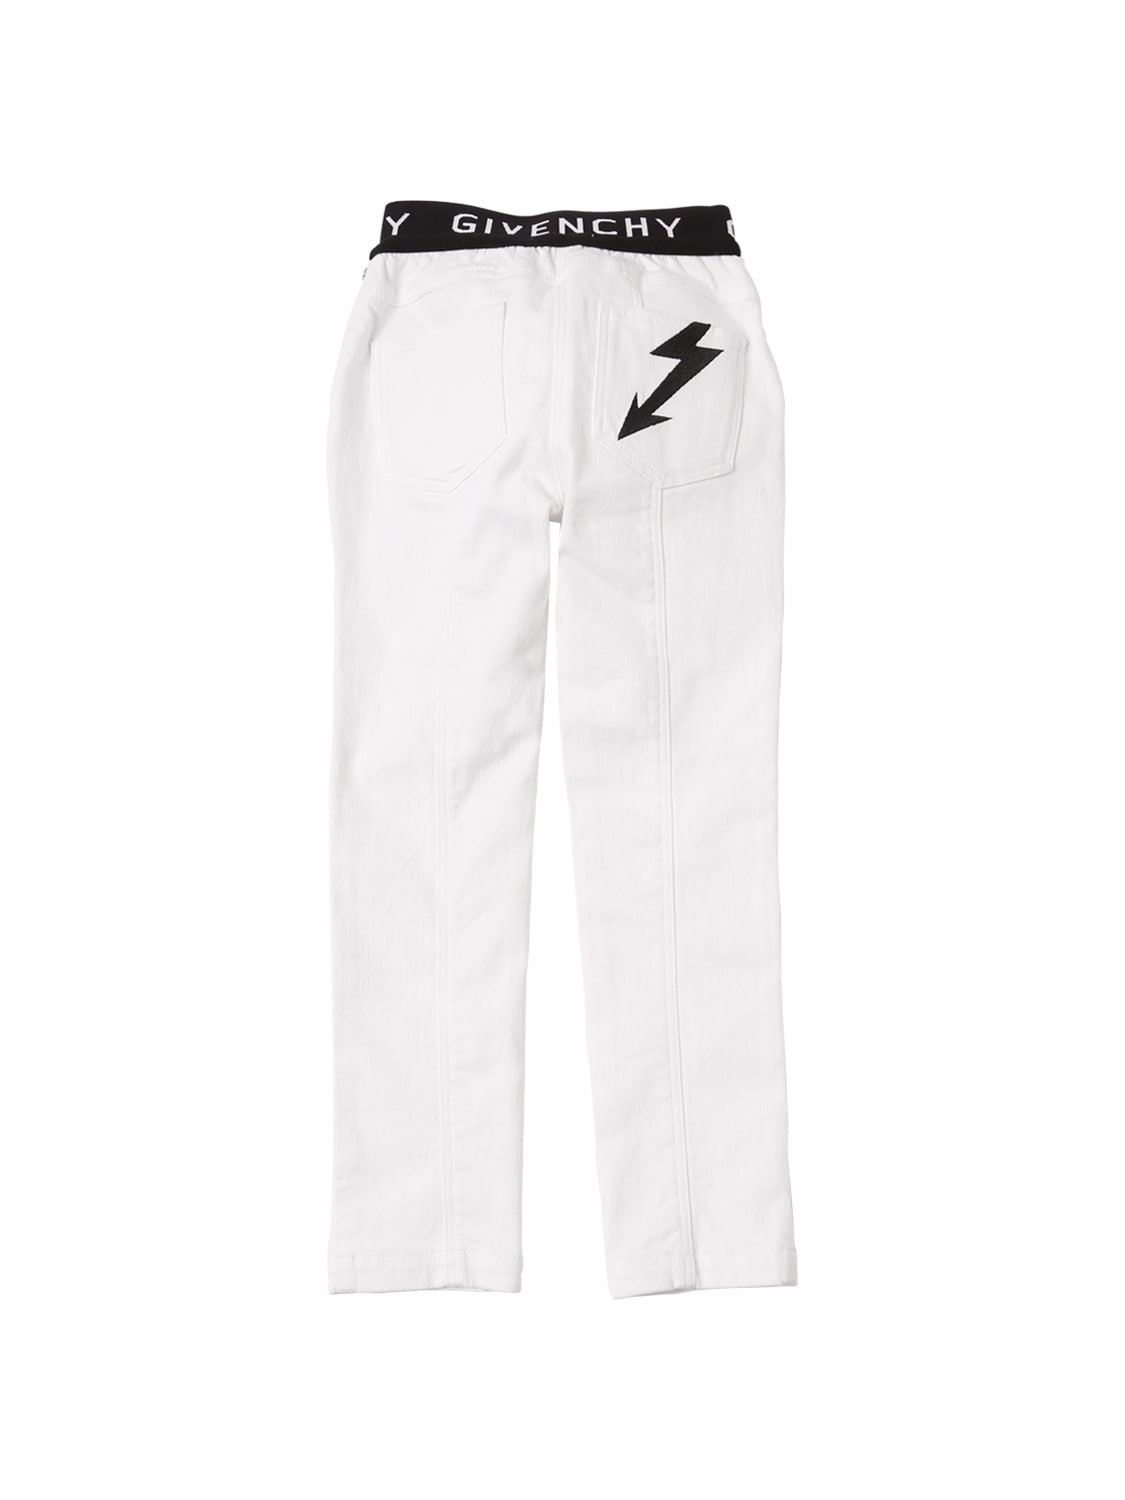 Givenchy Kids' Stretch Cotton Denim Jeans In White